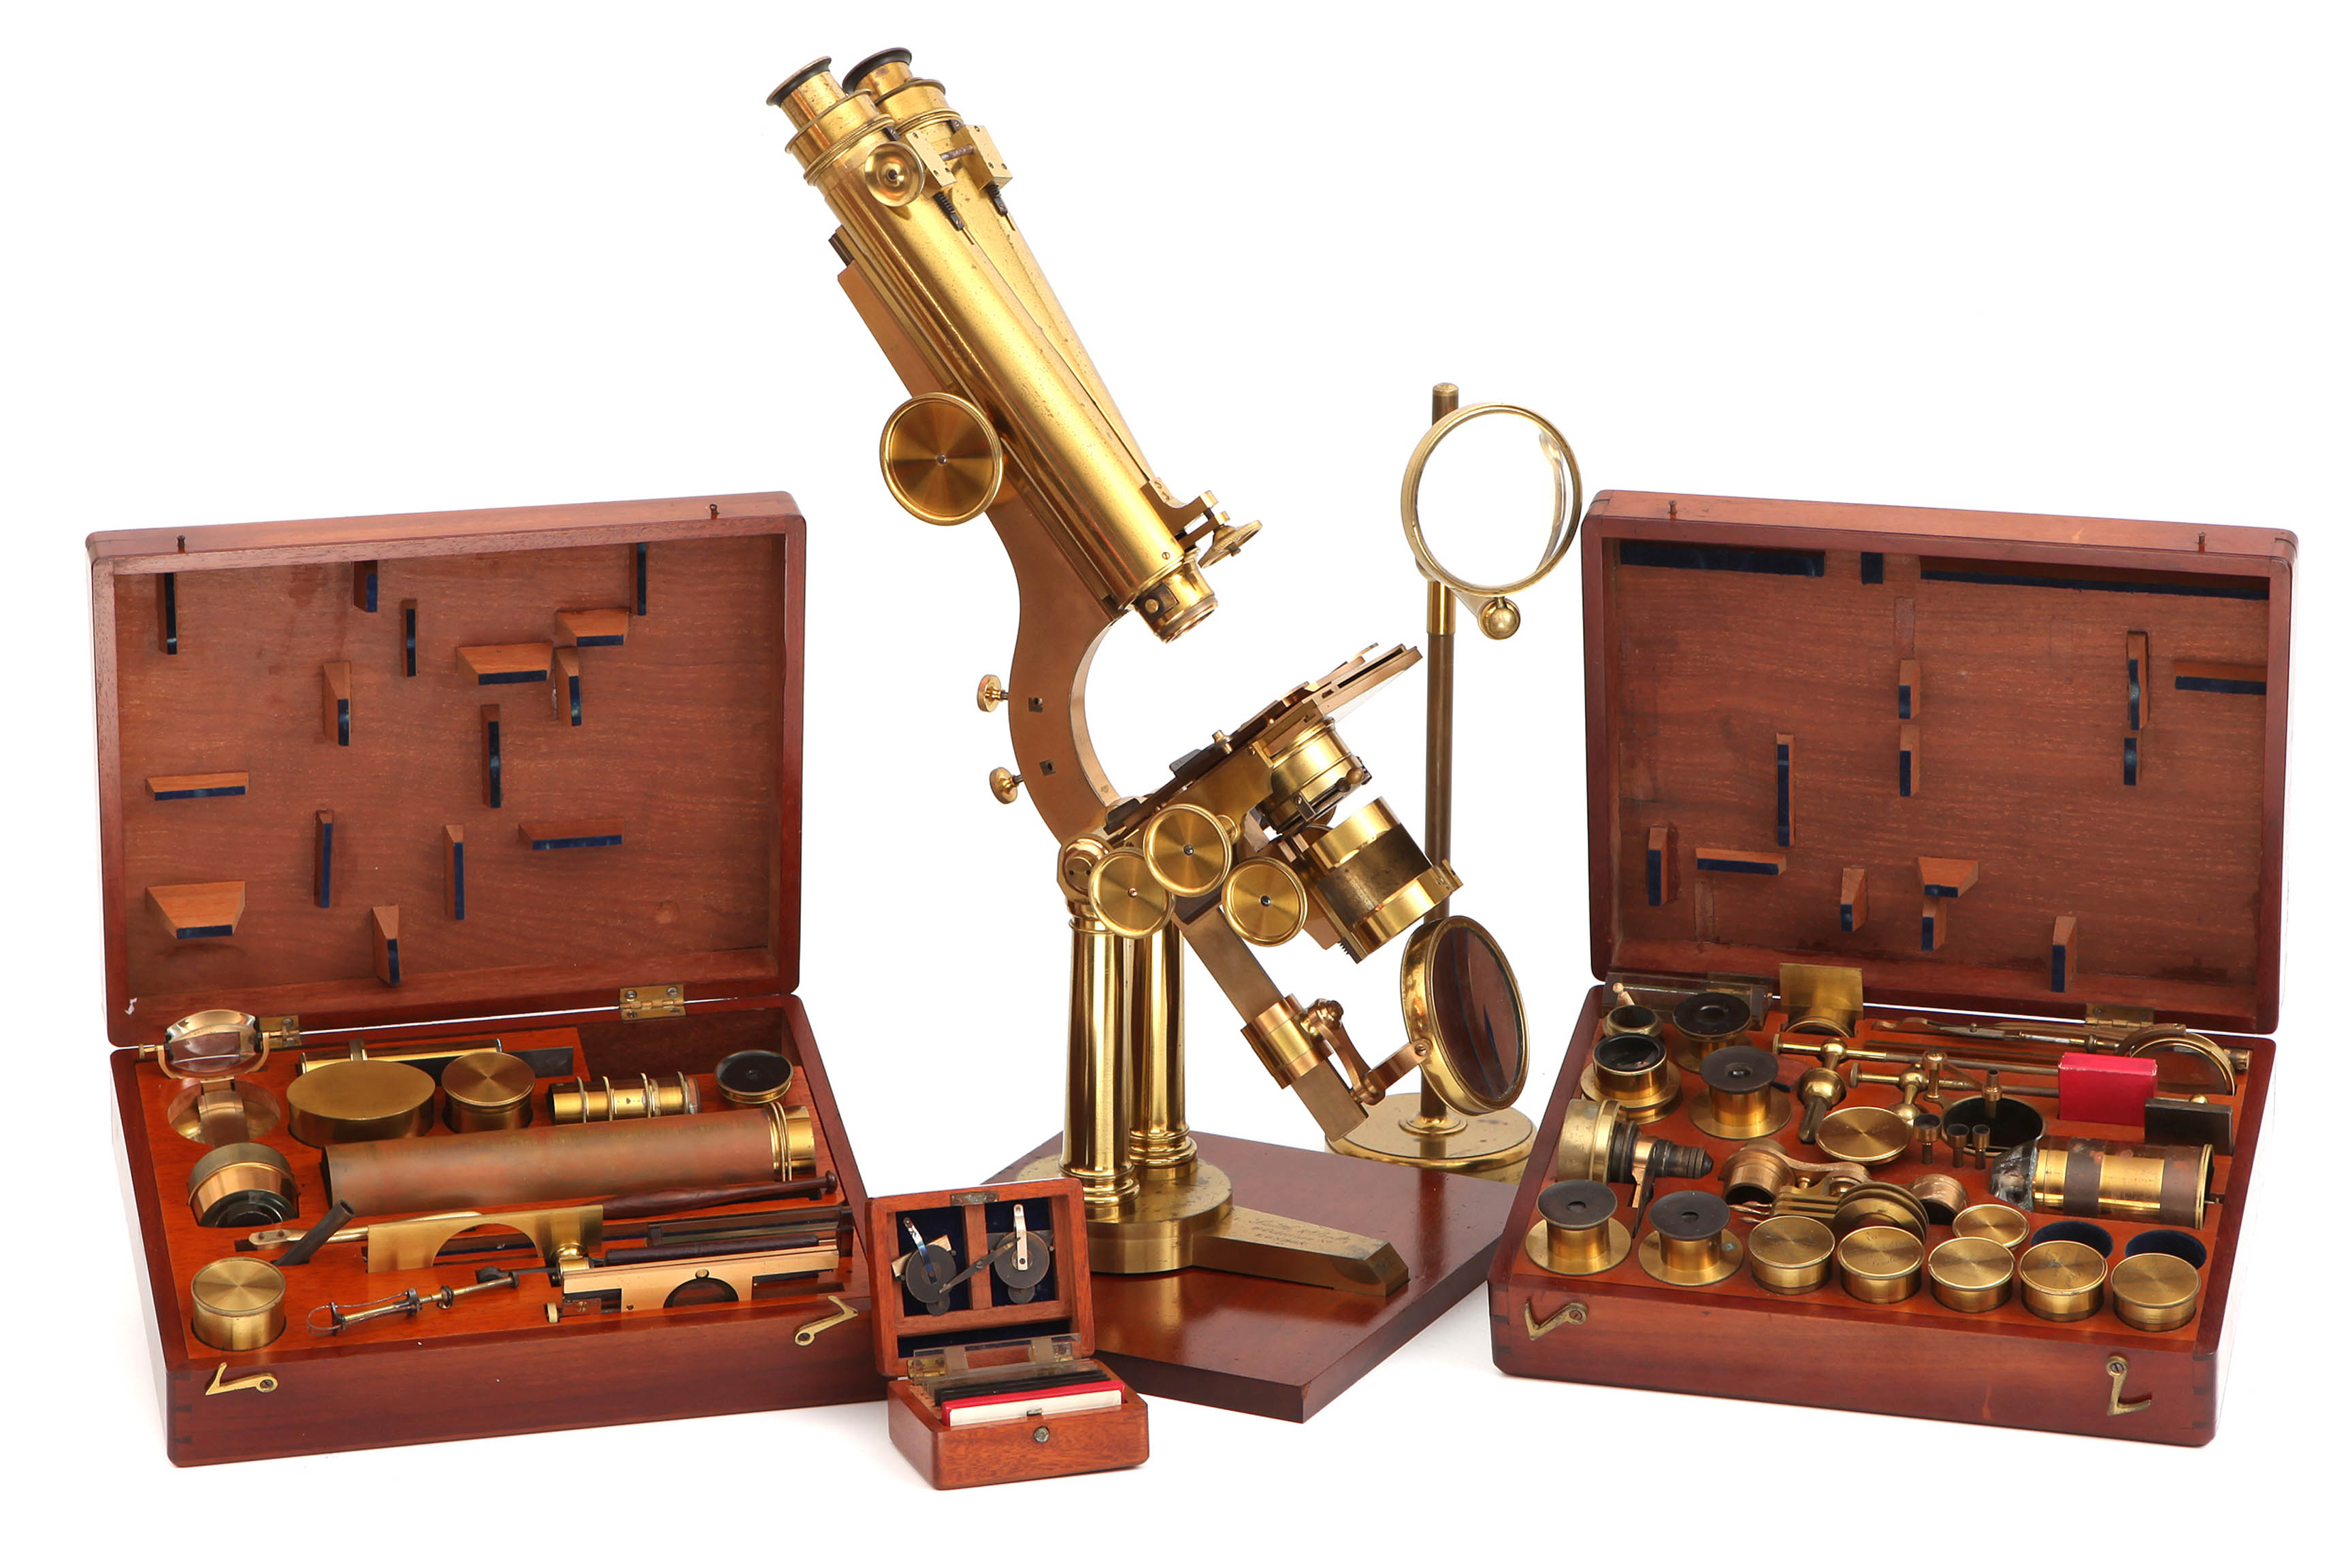 Smith and Beck Best No1 microscope